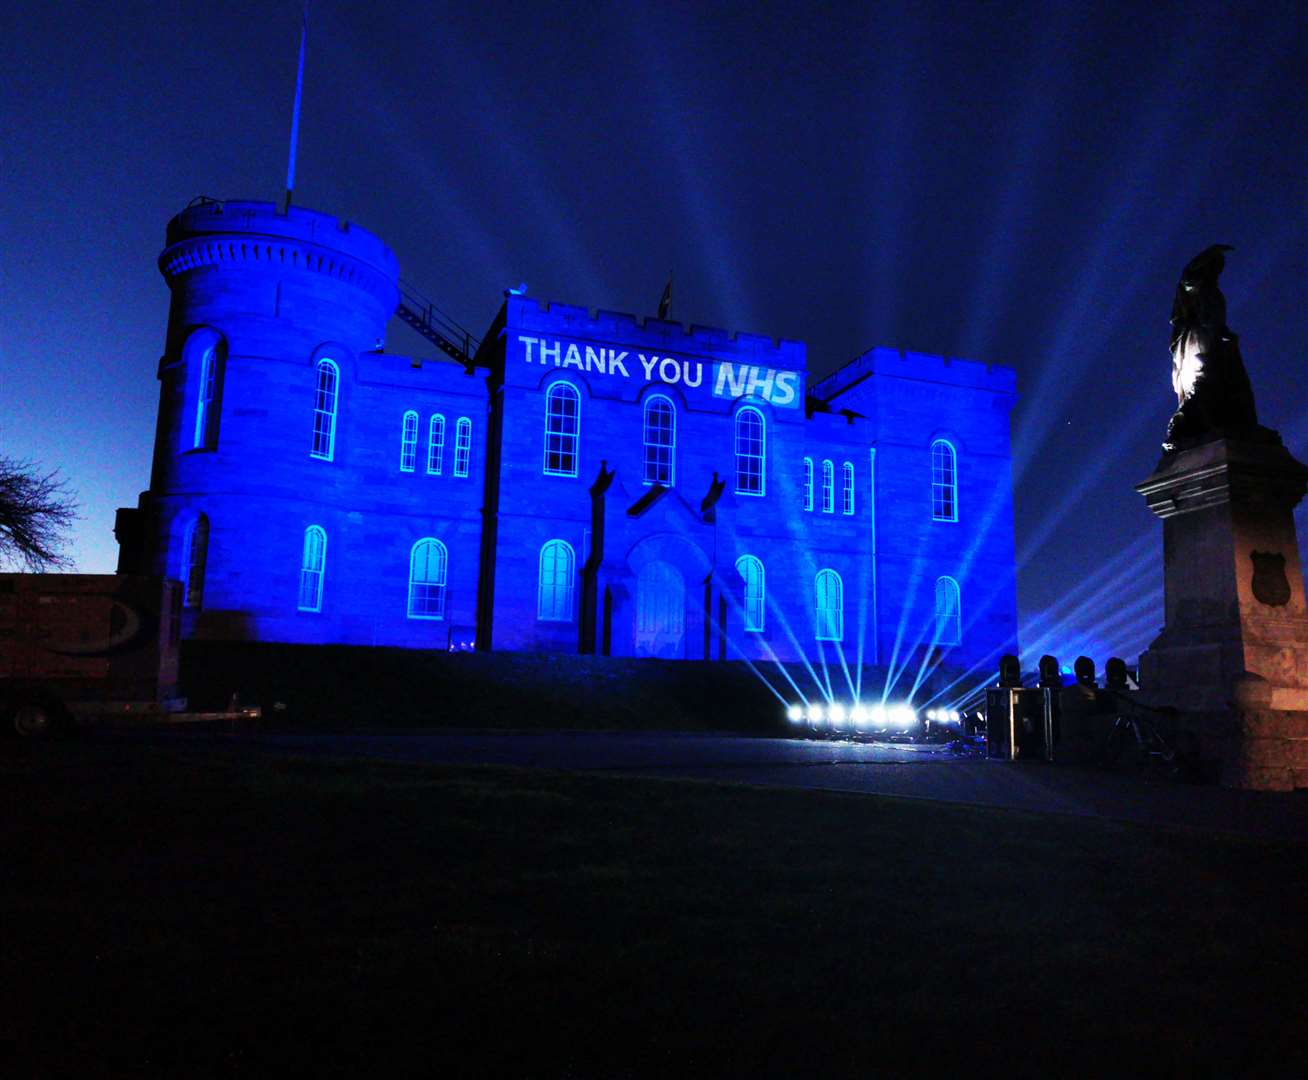 Inverness Castle was lit up to thank NHS staff. Photo: Craig Duncan of Limelight Event Services